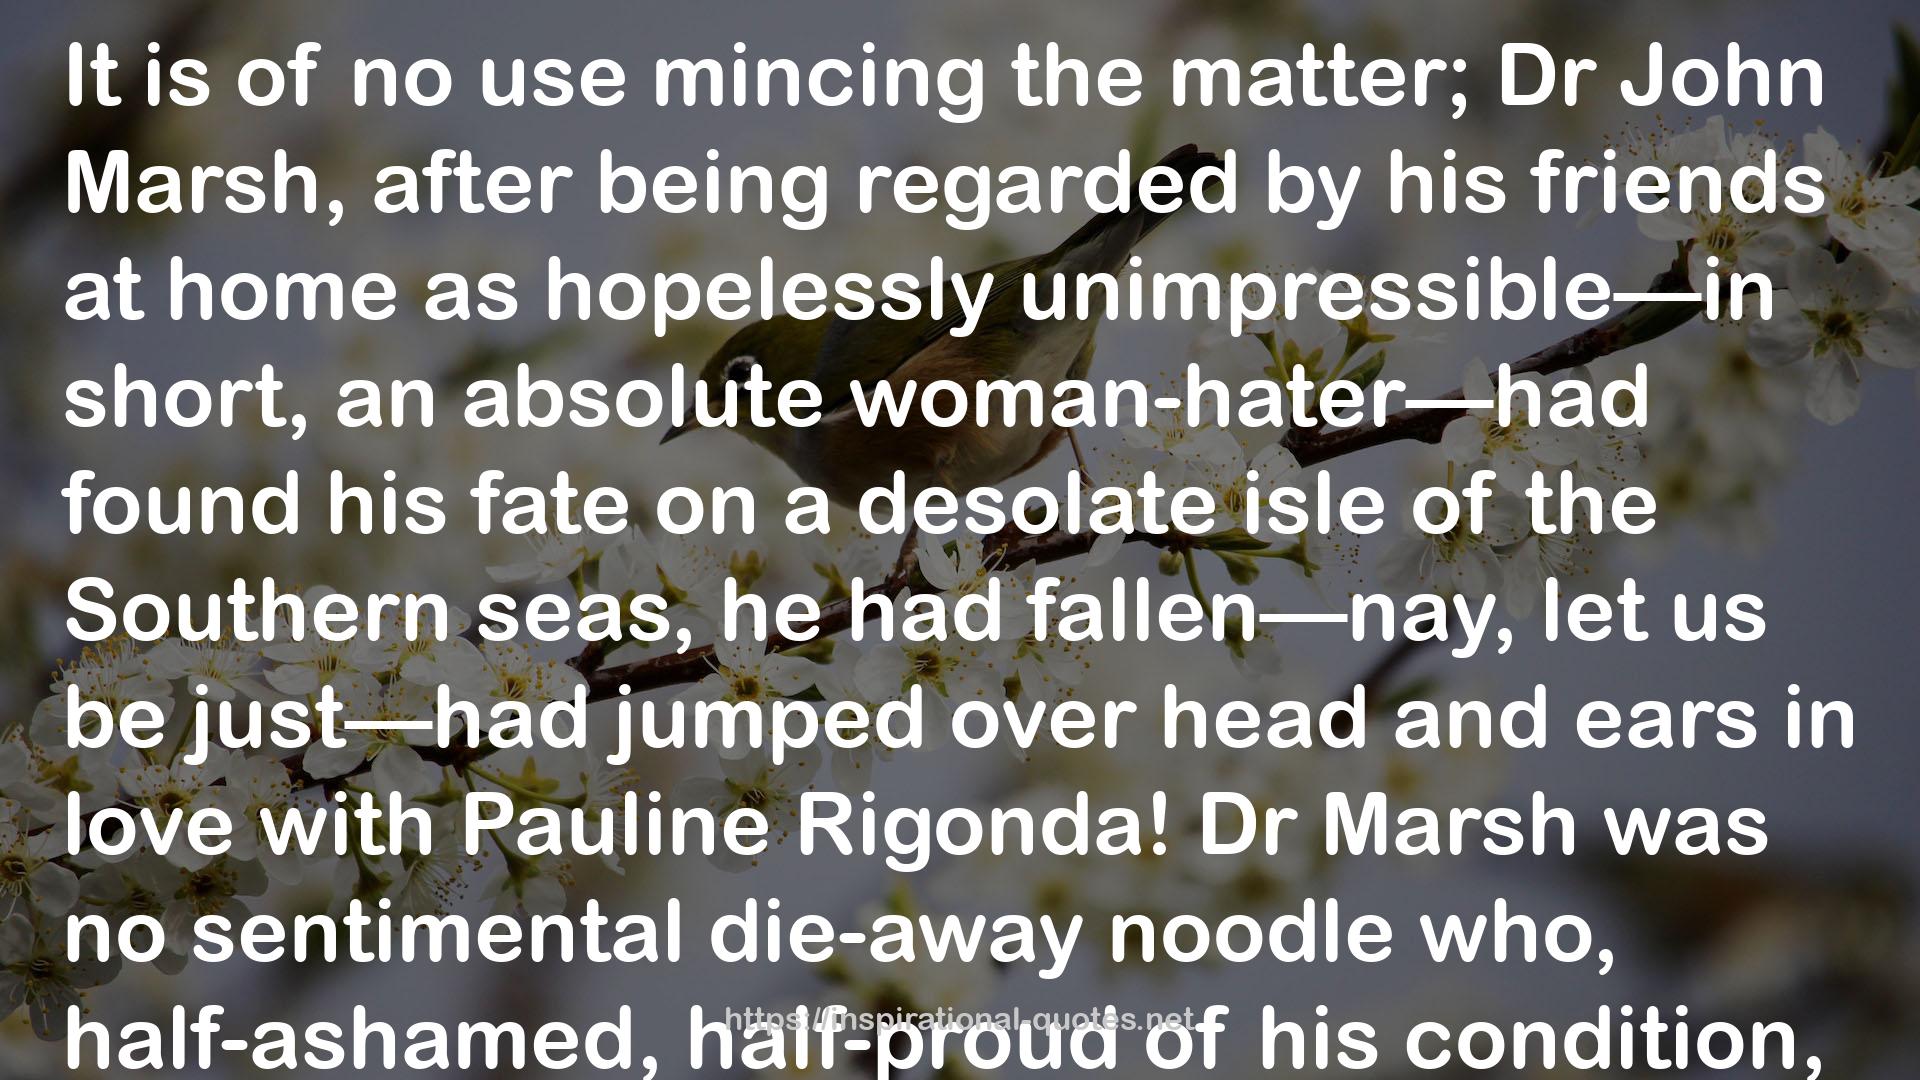 The Island Queen: Dethroned by Fire and Water: A Tale of the Southern Hemisphere QUOTES